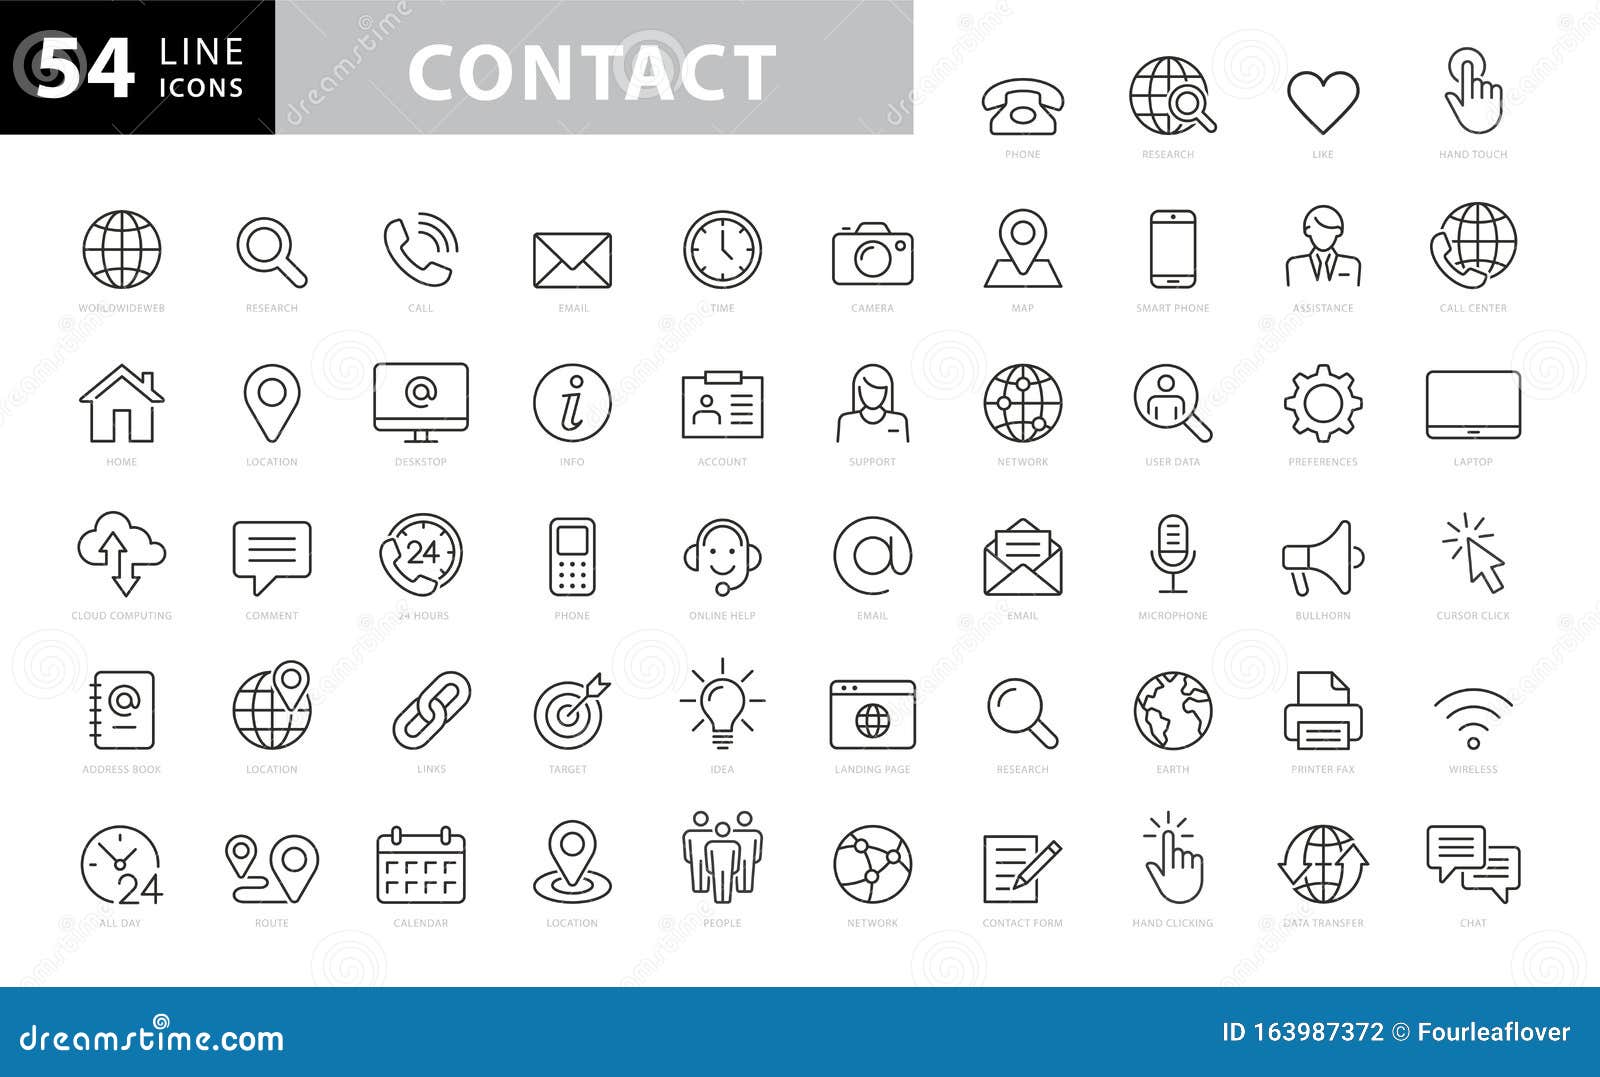 set of 54 contact us web icons in line style.